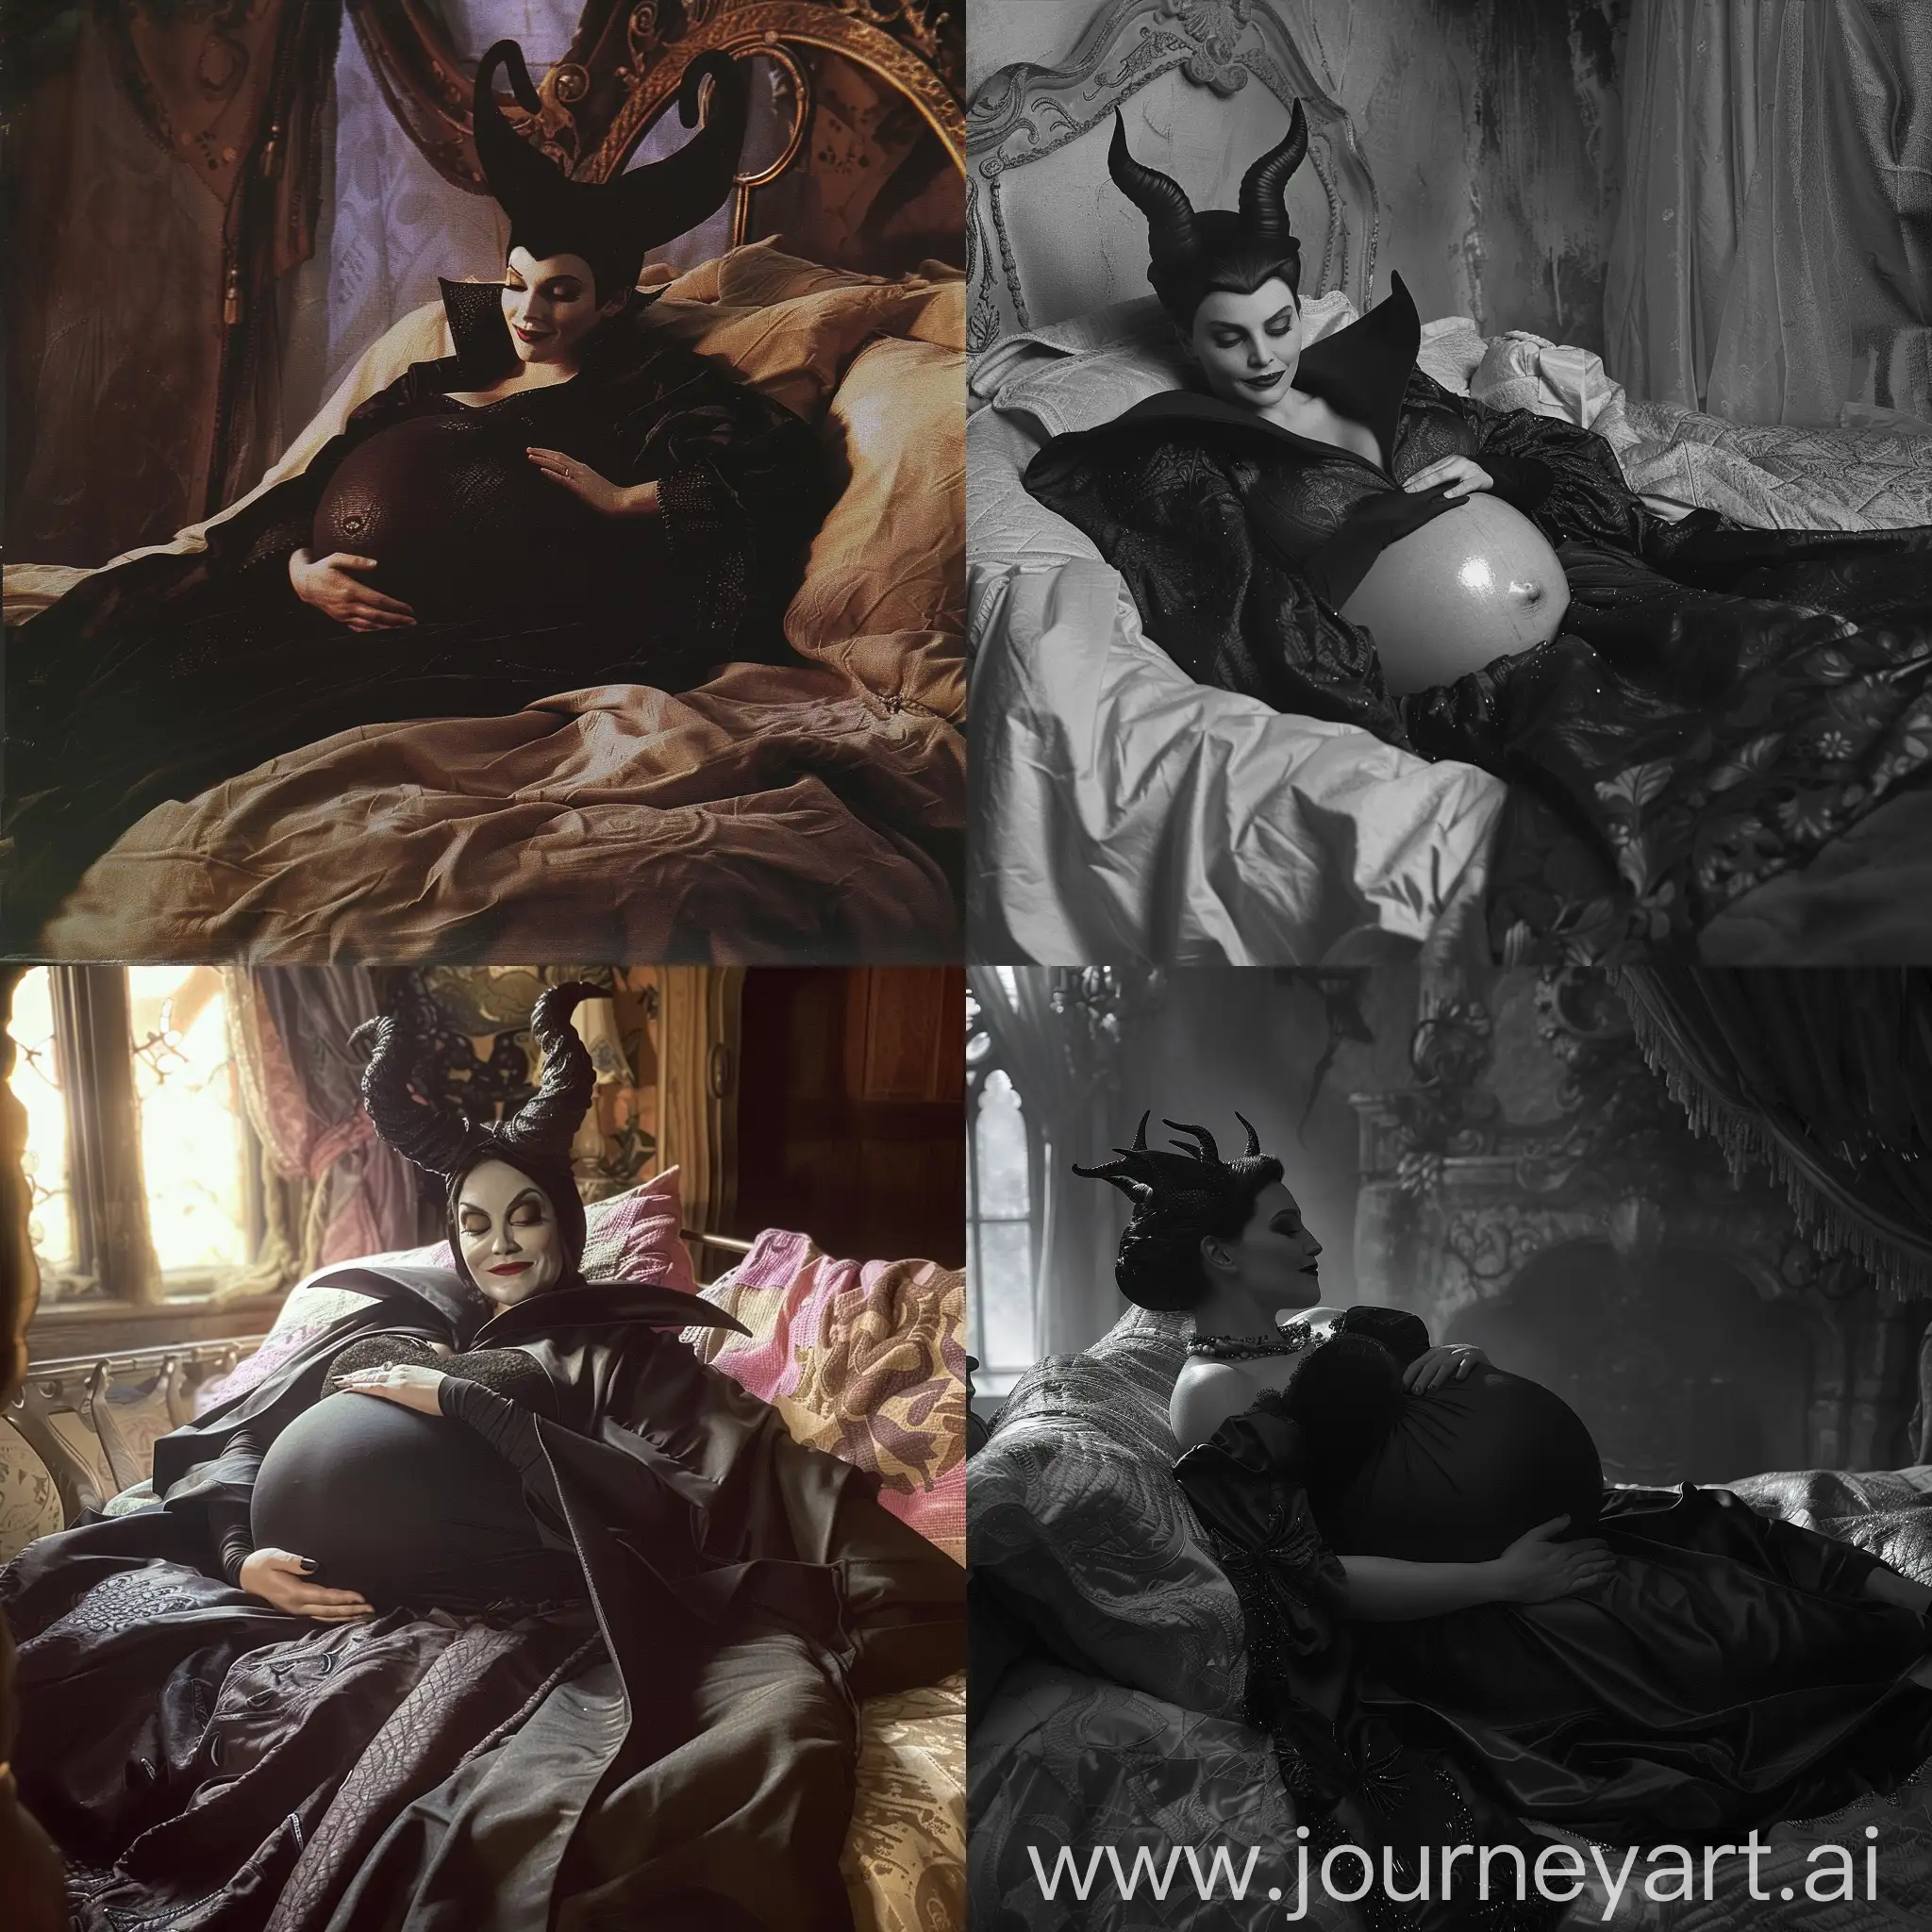 Pregnant-Maleficent-Rests-Comfortably-in-Bed-Showcasing-Her-Expectant-Belly